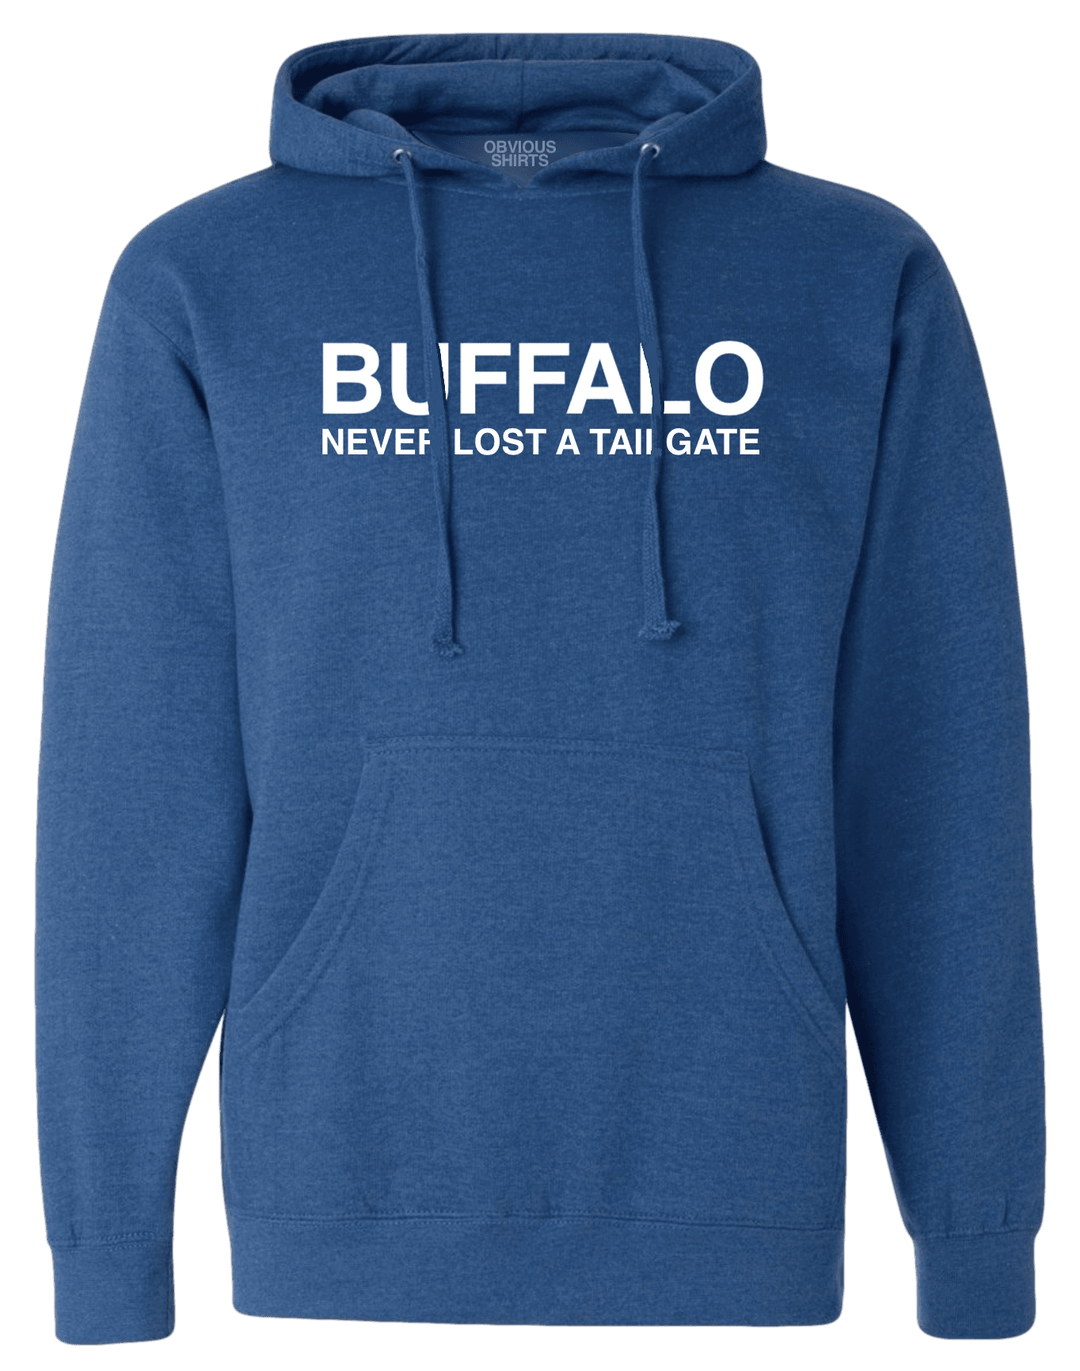 BUFFALO NEVER LOST A TAILGATE. (HOODED SWEATSHIRT) - OBVIOUS SHIRTS.